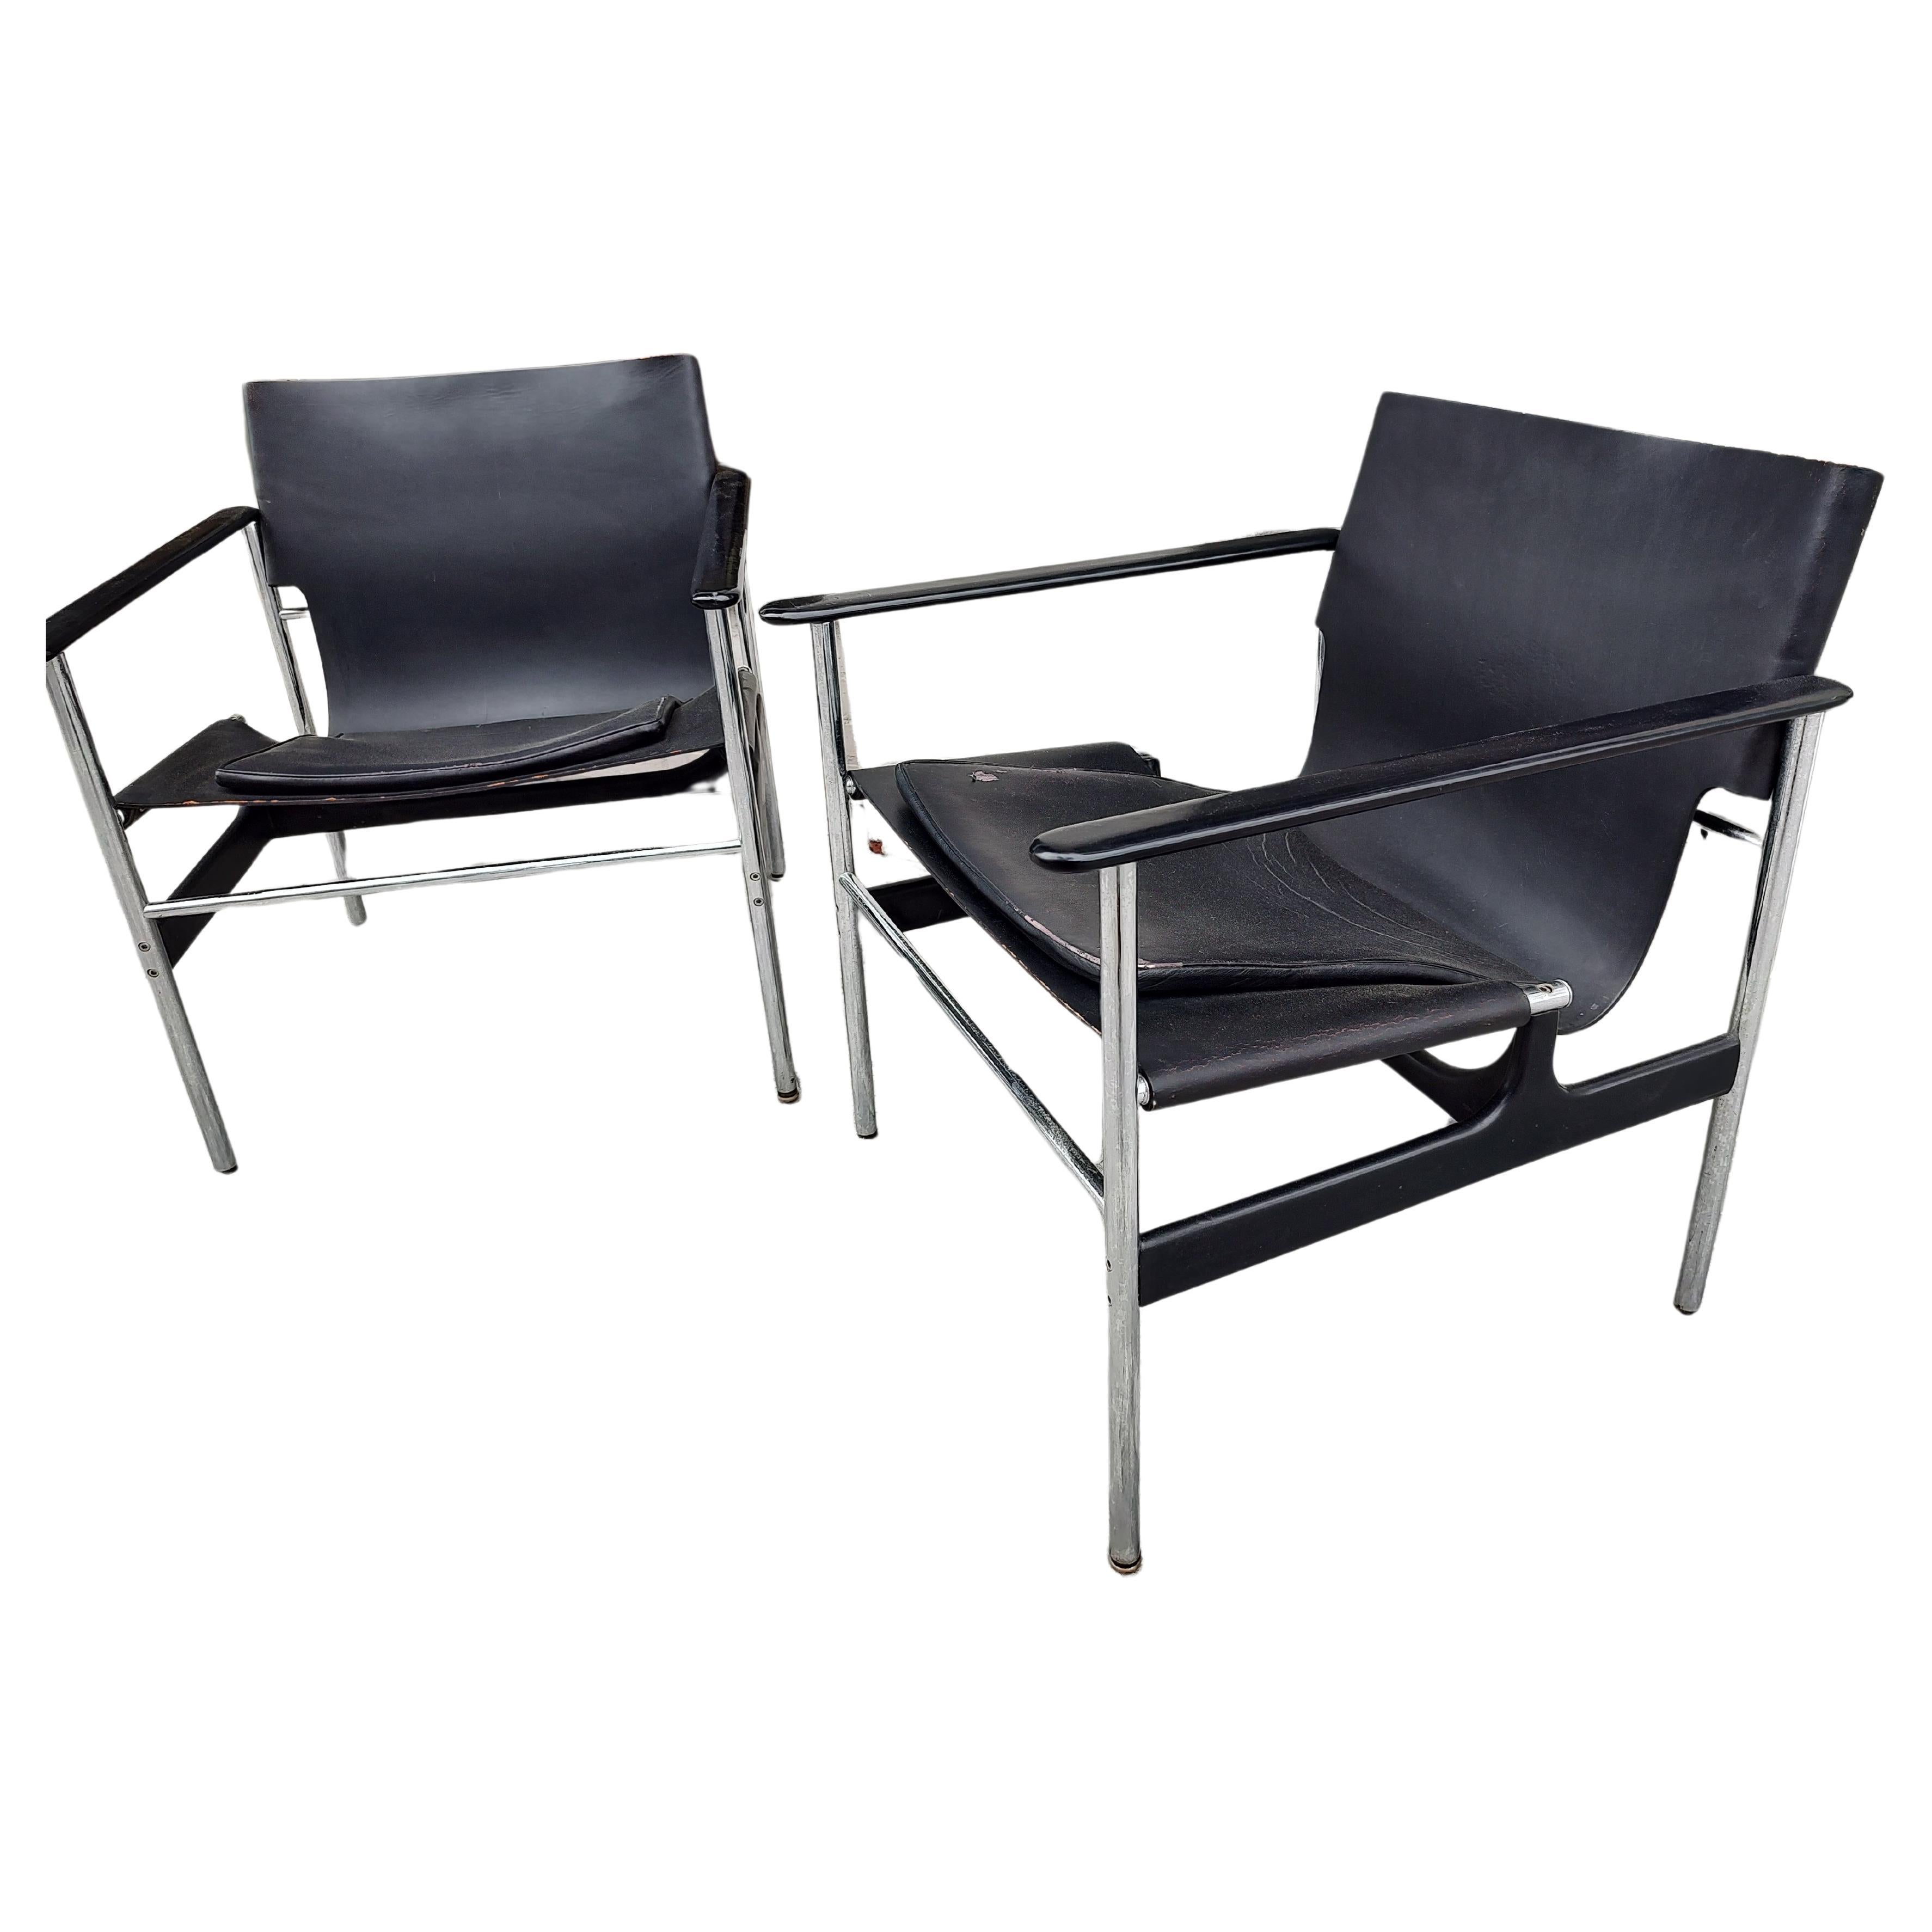 Pair of Mid-Century Modern Sculptural Lounge Chairs "657" Charles Pollock Knoll For Sale